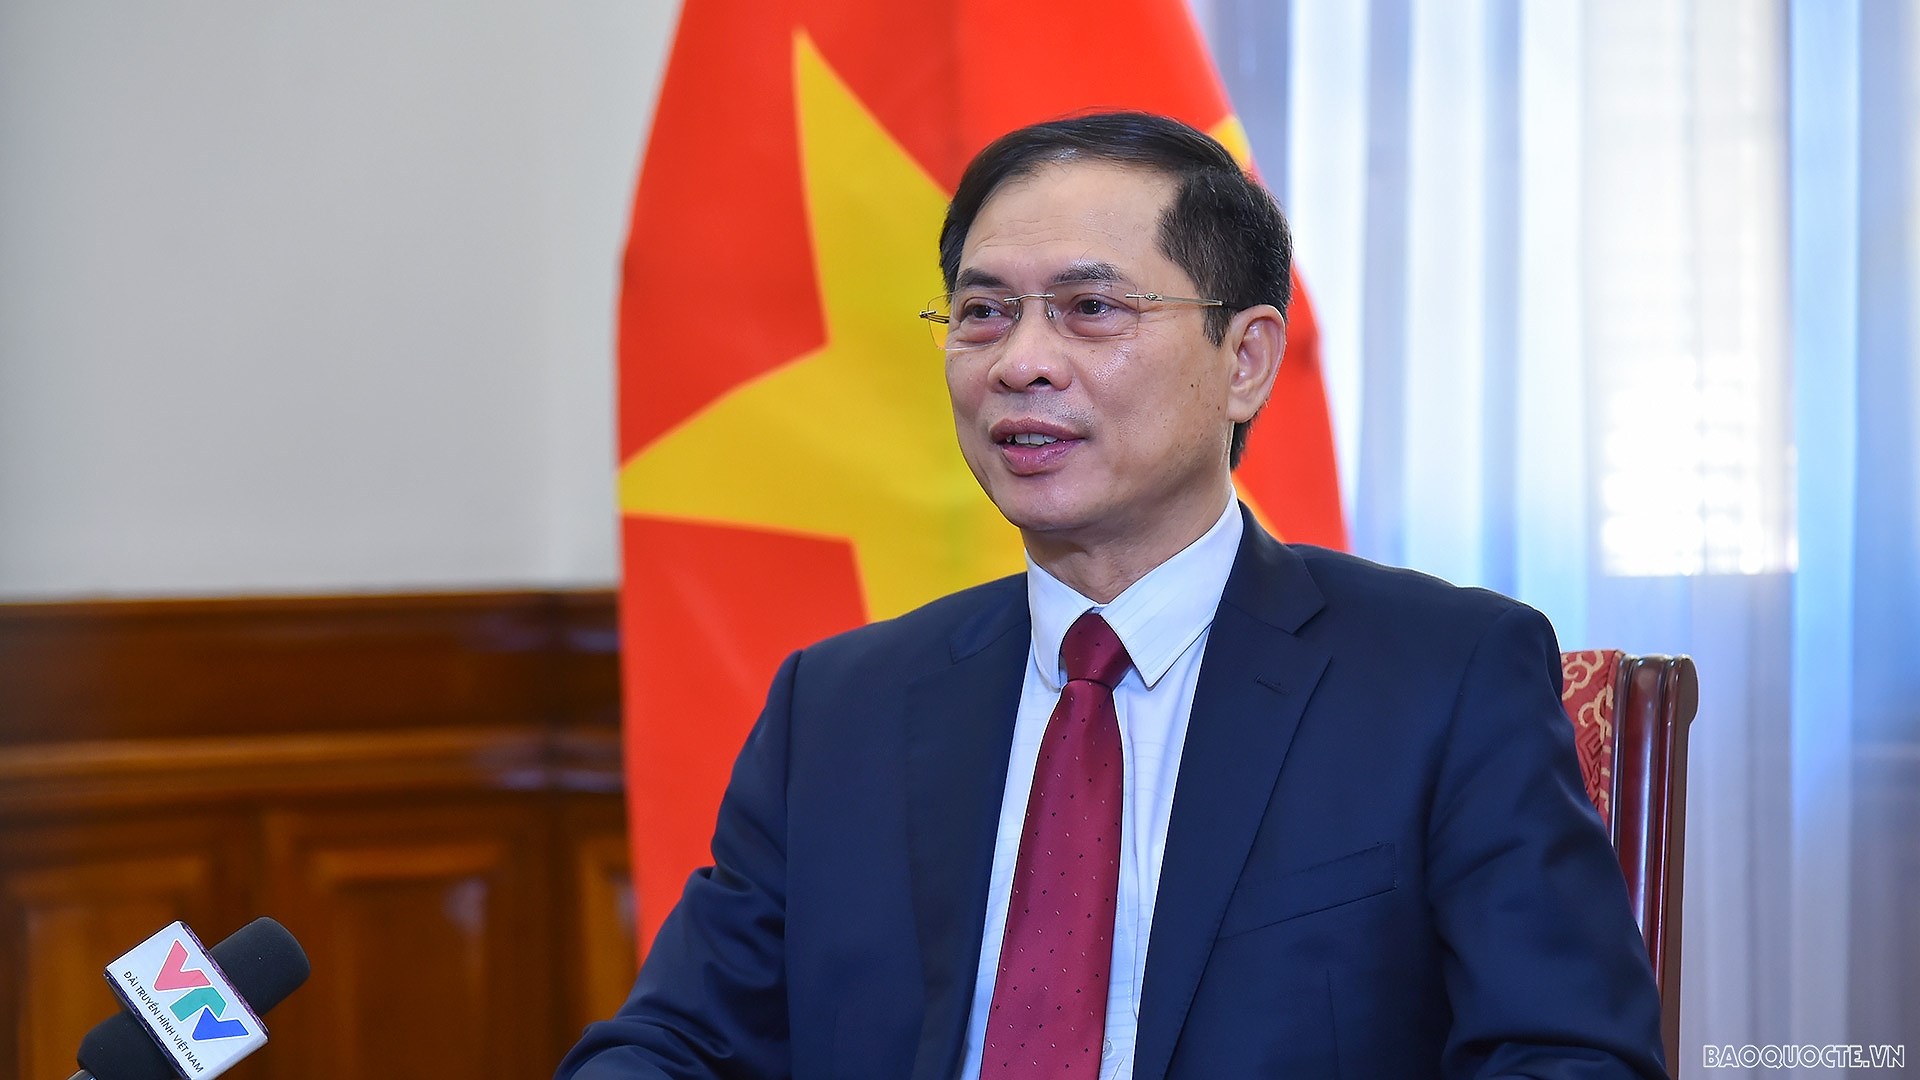 Minister hails significance of Conclusion on OV affairs hinh anh 1